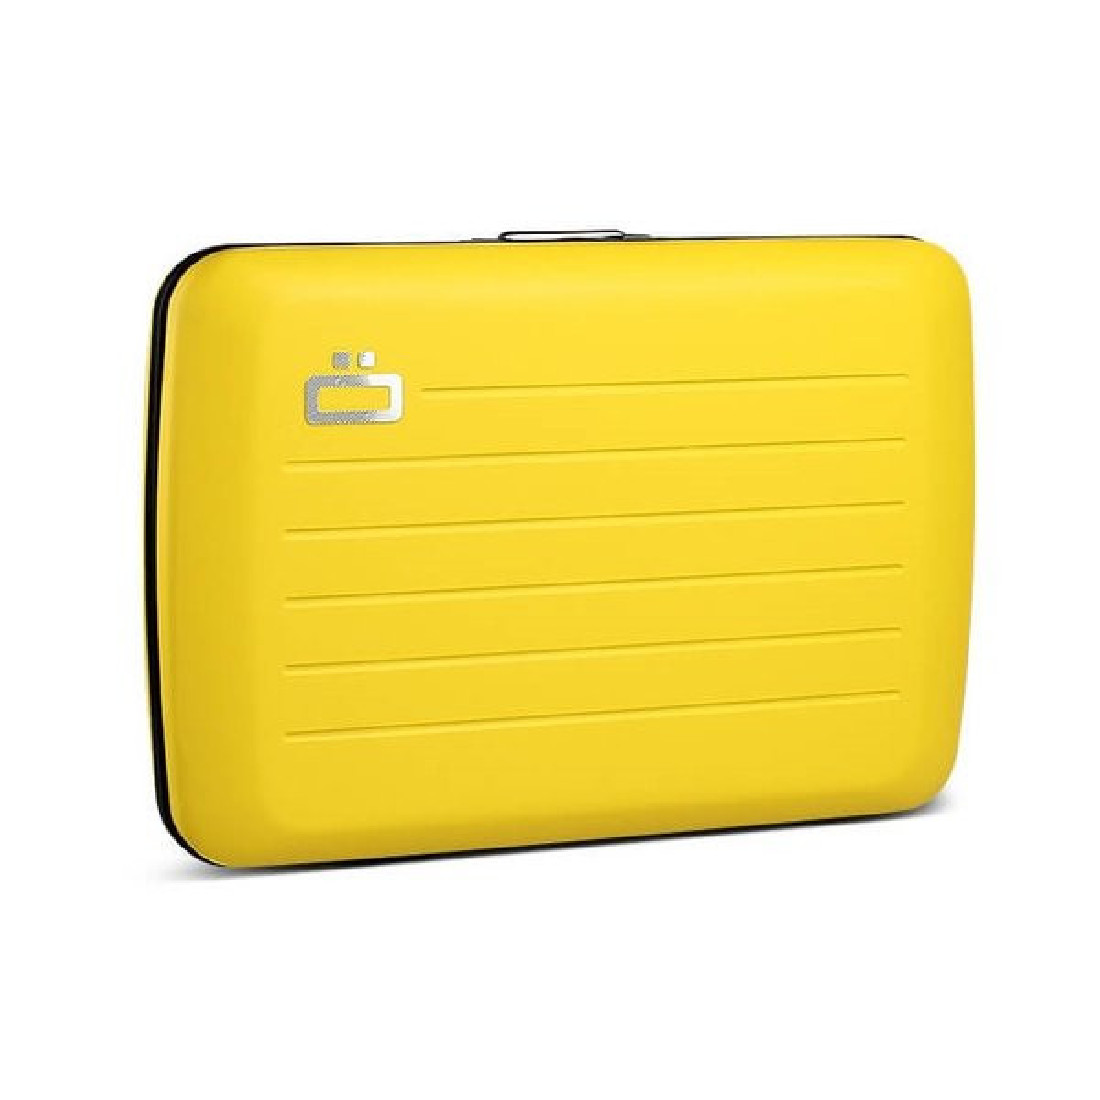 OGON CARD CASE TAXI YELLOW STOCKHOLM 10 CARDS + CASH